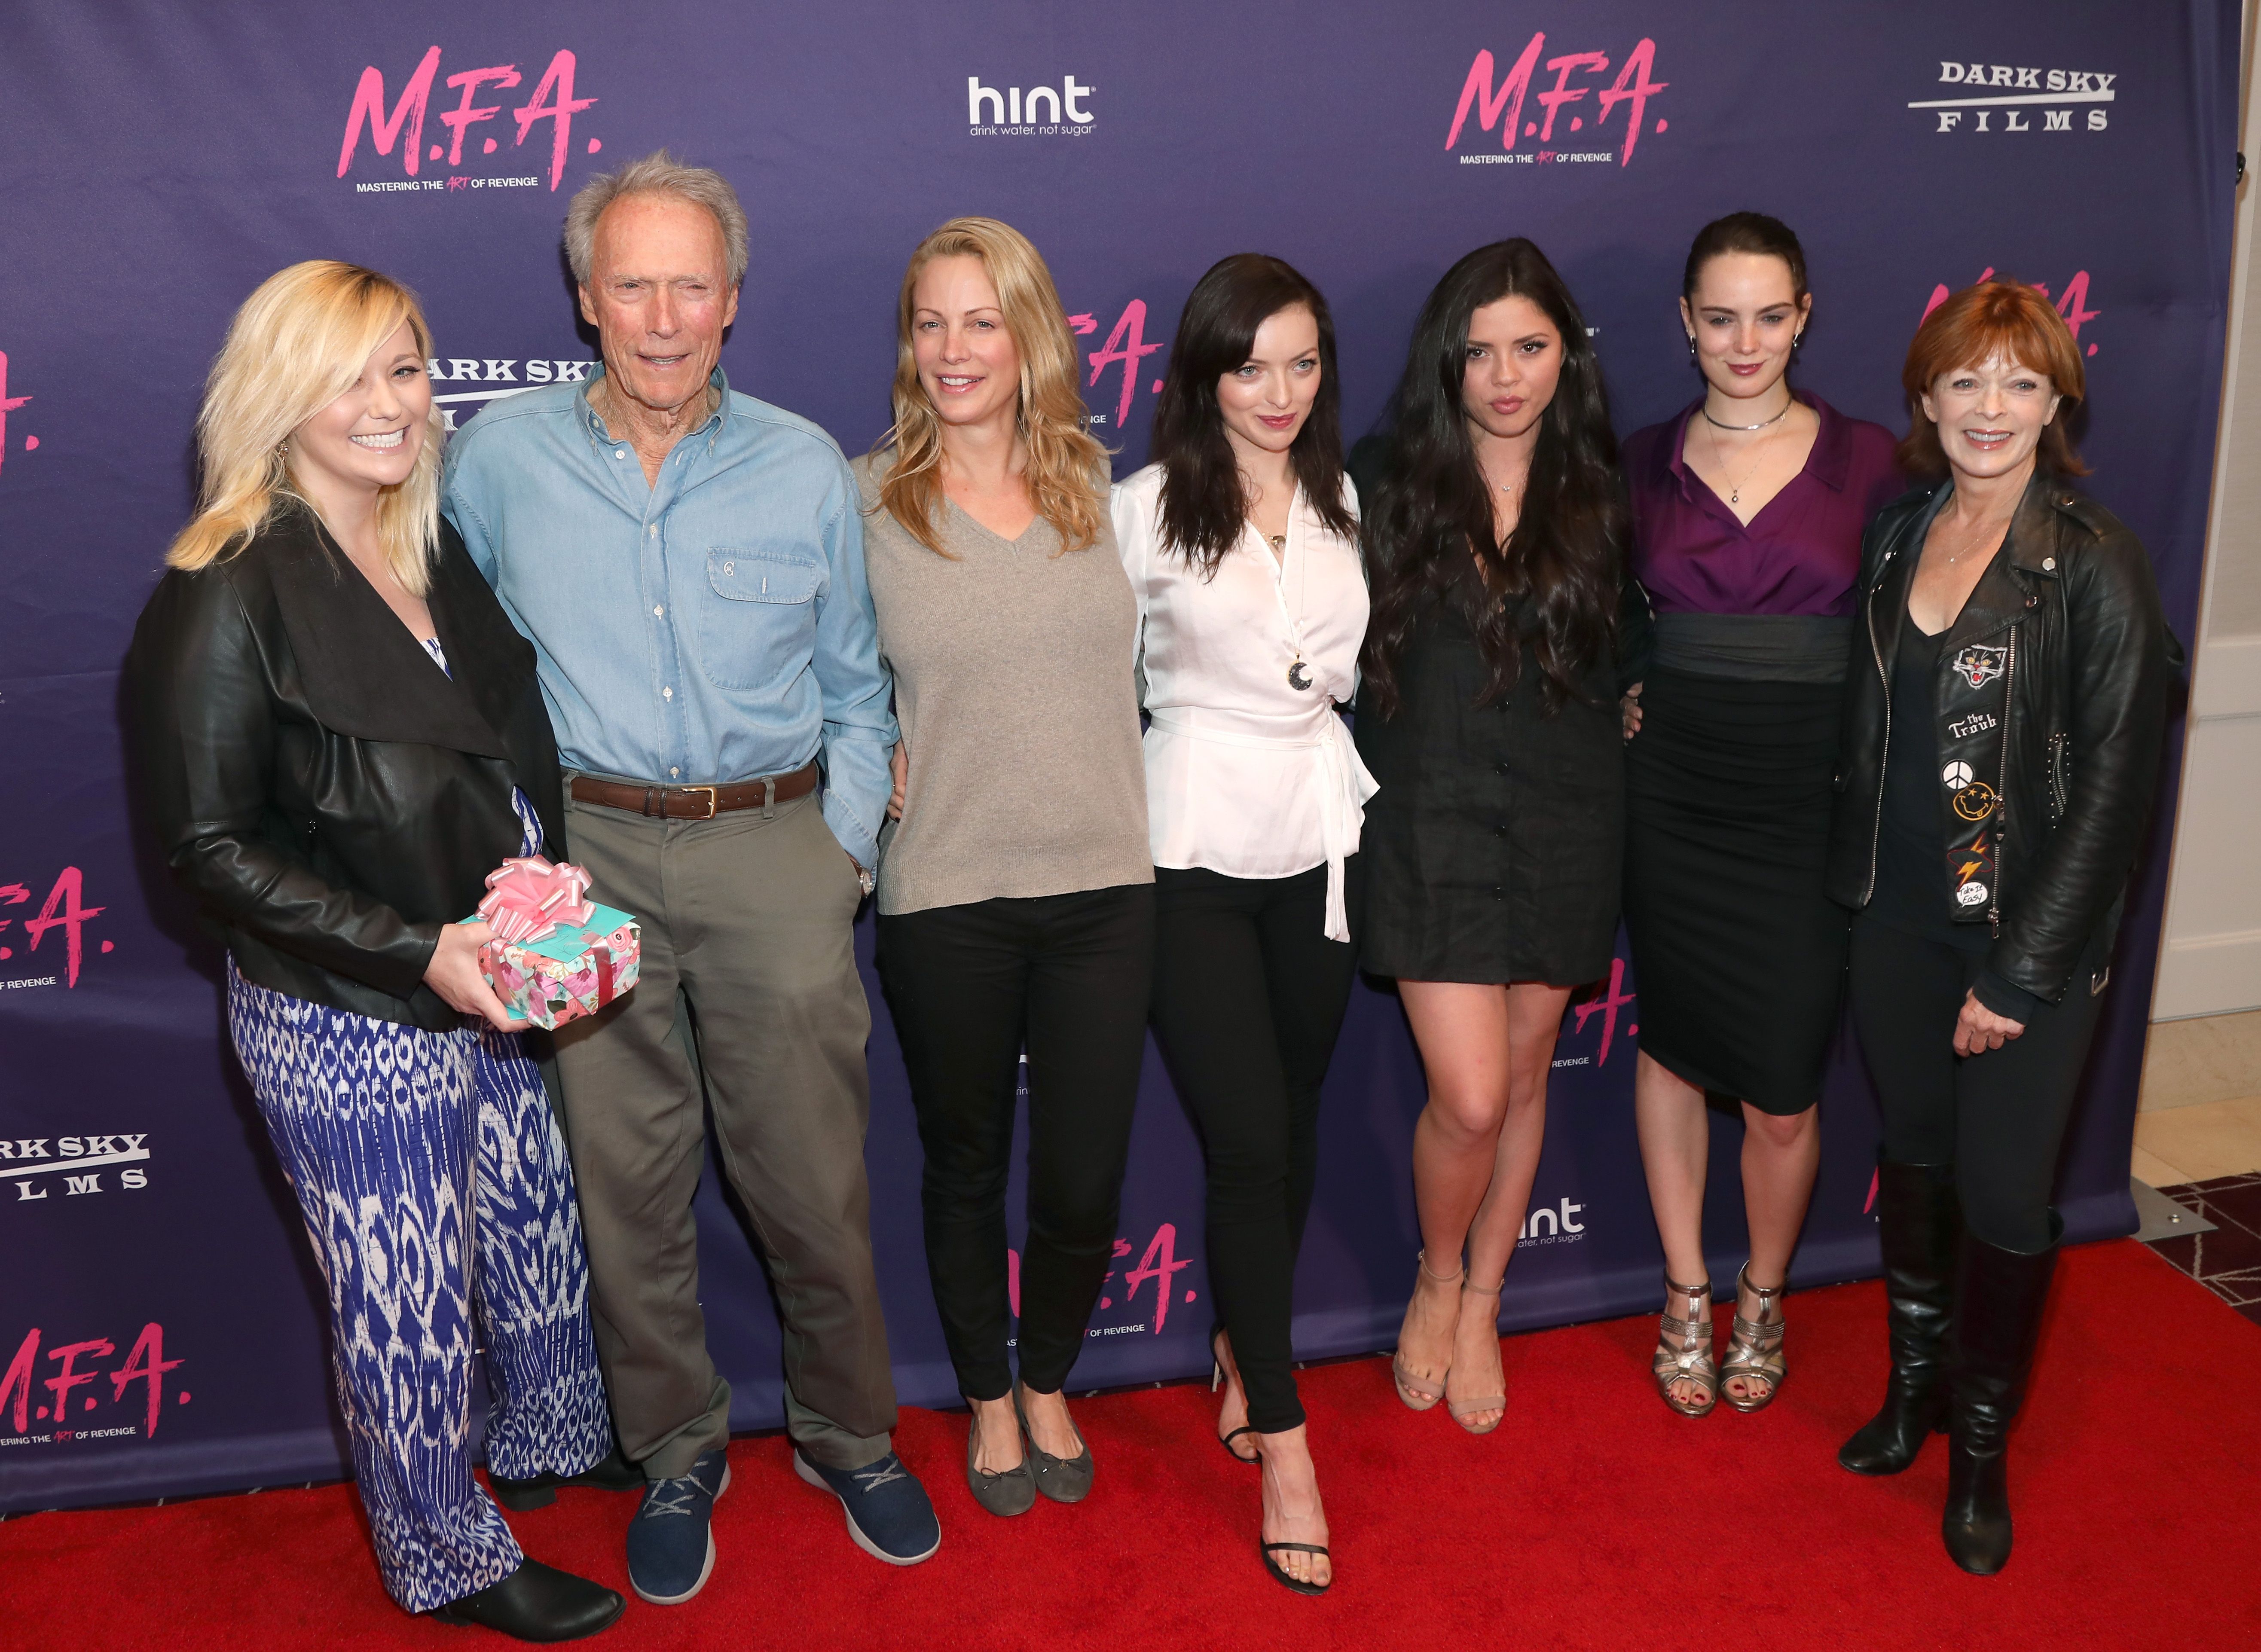 Kathryn Eastwood, Clint Eastwood, Alison Eastwood, Francesca Eastwood, Morgan Eastwood and Francis Fisher attend the Premiere Of Dark Sky Films' "M.F.A." at The London West Hollywood on October 2, 2017 | Photo: Getty Images